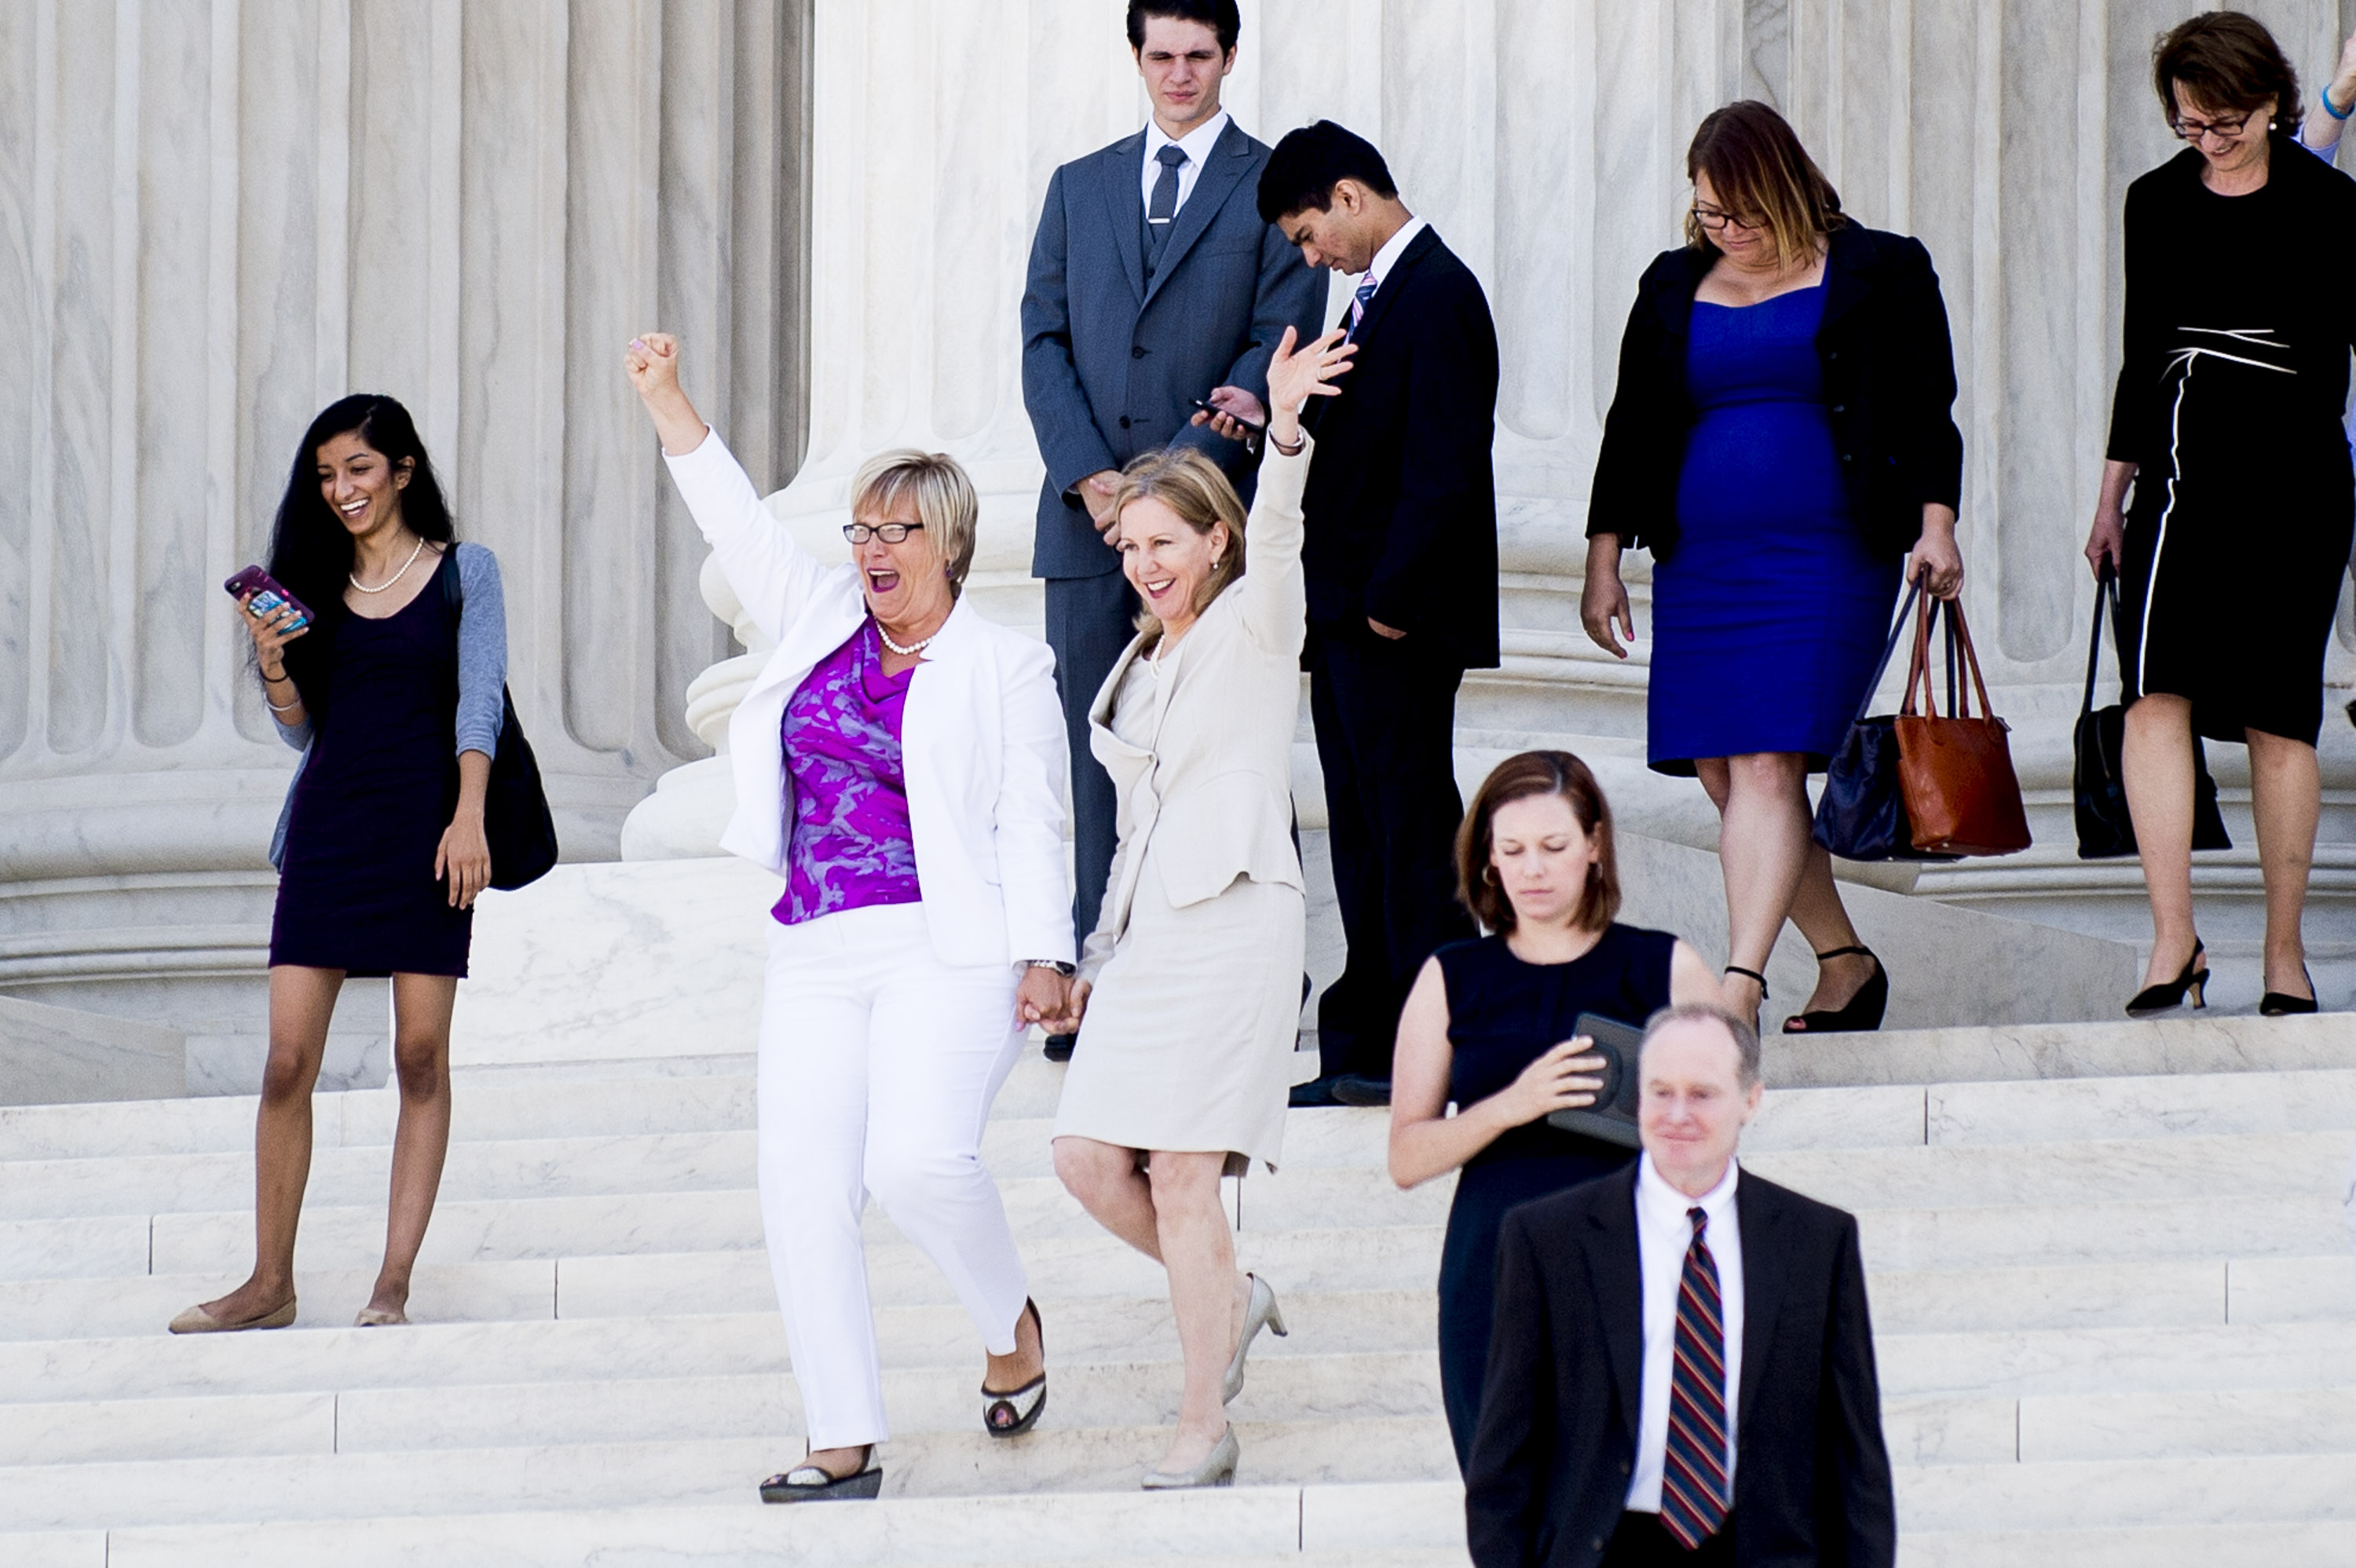 Texas abortion provider Amy Hagstrom-Miller and Nancy Northup, President of The Center for Reproductive Rights wave to supporters as they descend the steps of the United States Supreme Court in Washington, D.C., on June 27, 2016. (Pete Marovich—Getty Images)